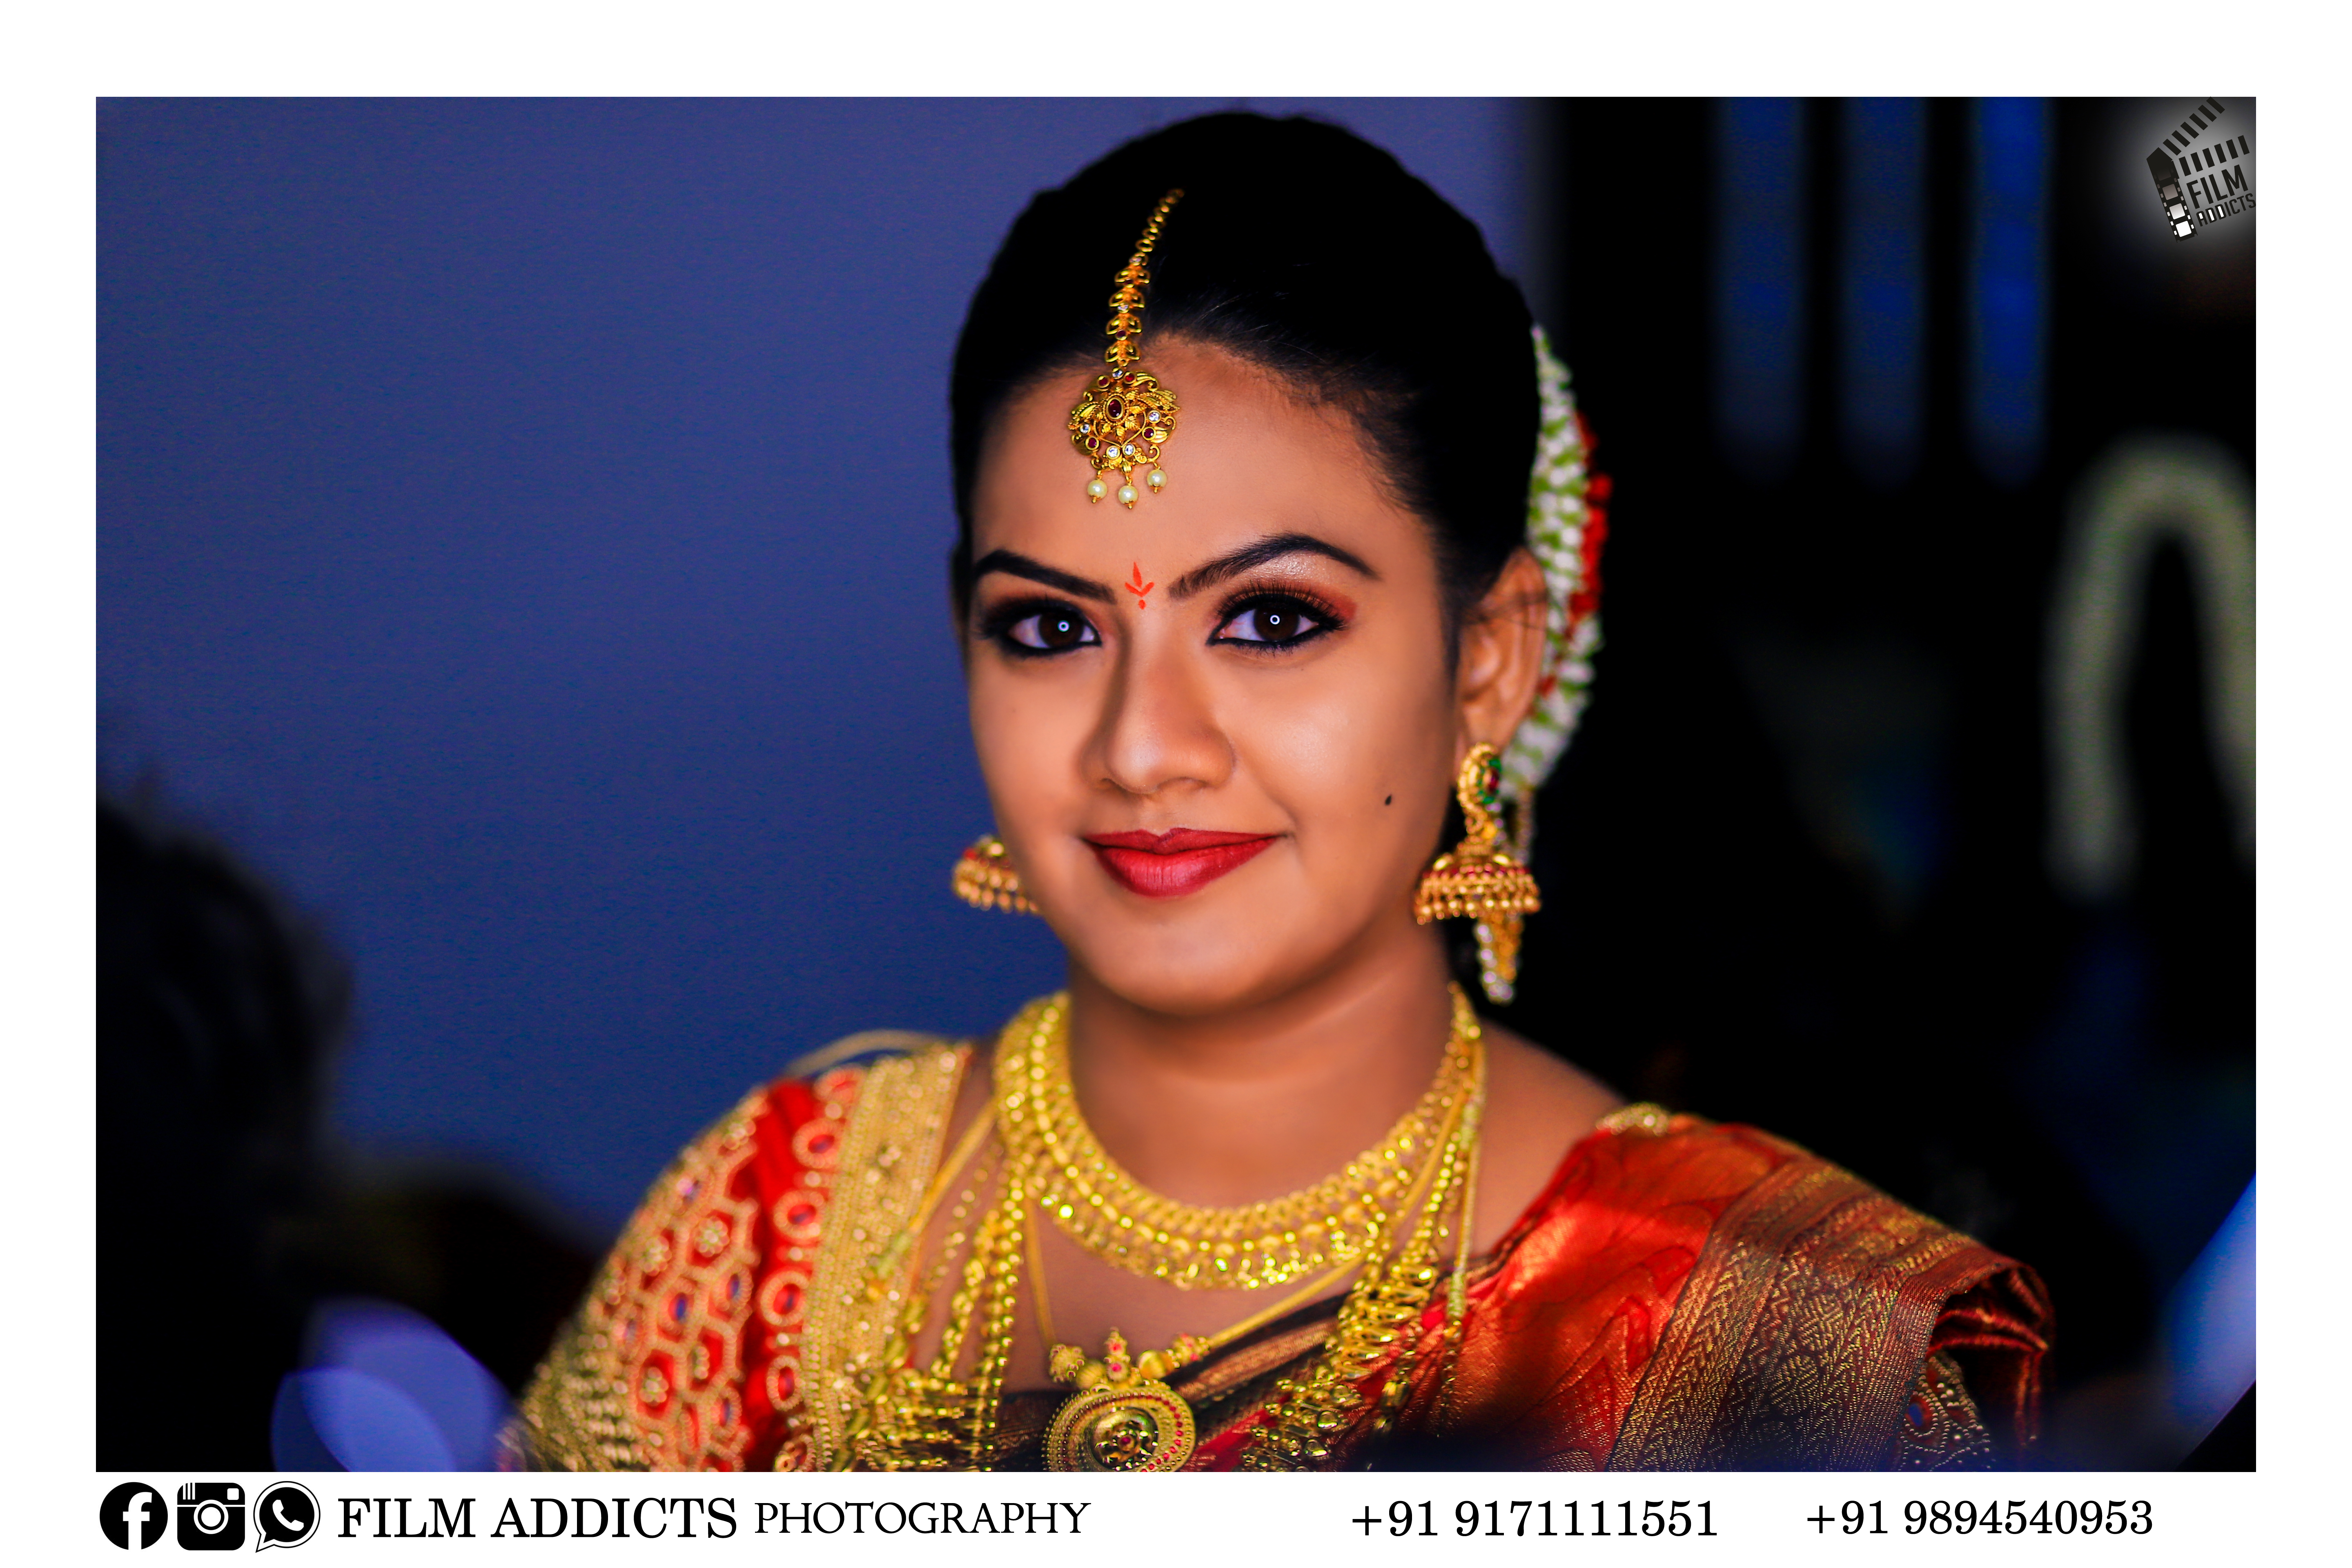 best bridal makeup Services in theni,
                                        best marriage bridal makeup services in theni,
                                        famous bridal makeup services in theni,
                                        best events bridal makeup services in theni,
                                        Eventing bridal makeup services in theni,
                                        excellent bridal makeup services in theni,
                                        professional bridal makeup services in theni,
                                        theni's best bridal makeup services,
                                        theni's best bridal makeup services in theni,
                                        filmaddicts bridal makeup services in theni,
                                        filmaddicts best bridal makeup in theni,
                                        filmaddicts best bridal makeup services in theni,
                                        bridal makeup services in theni
                                        